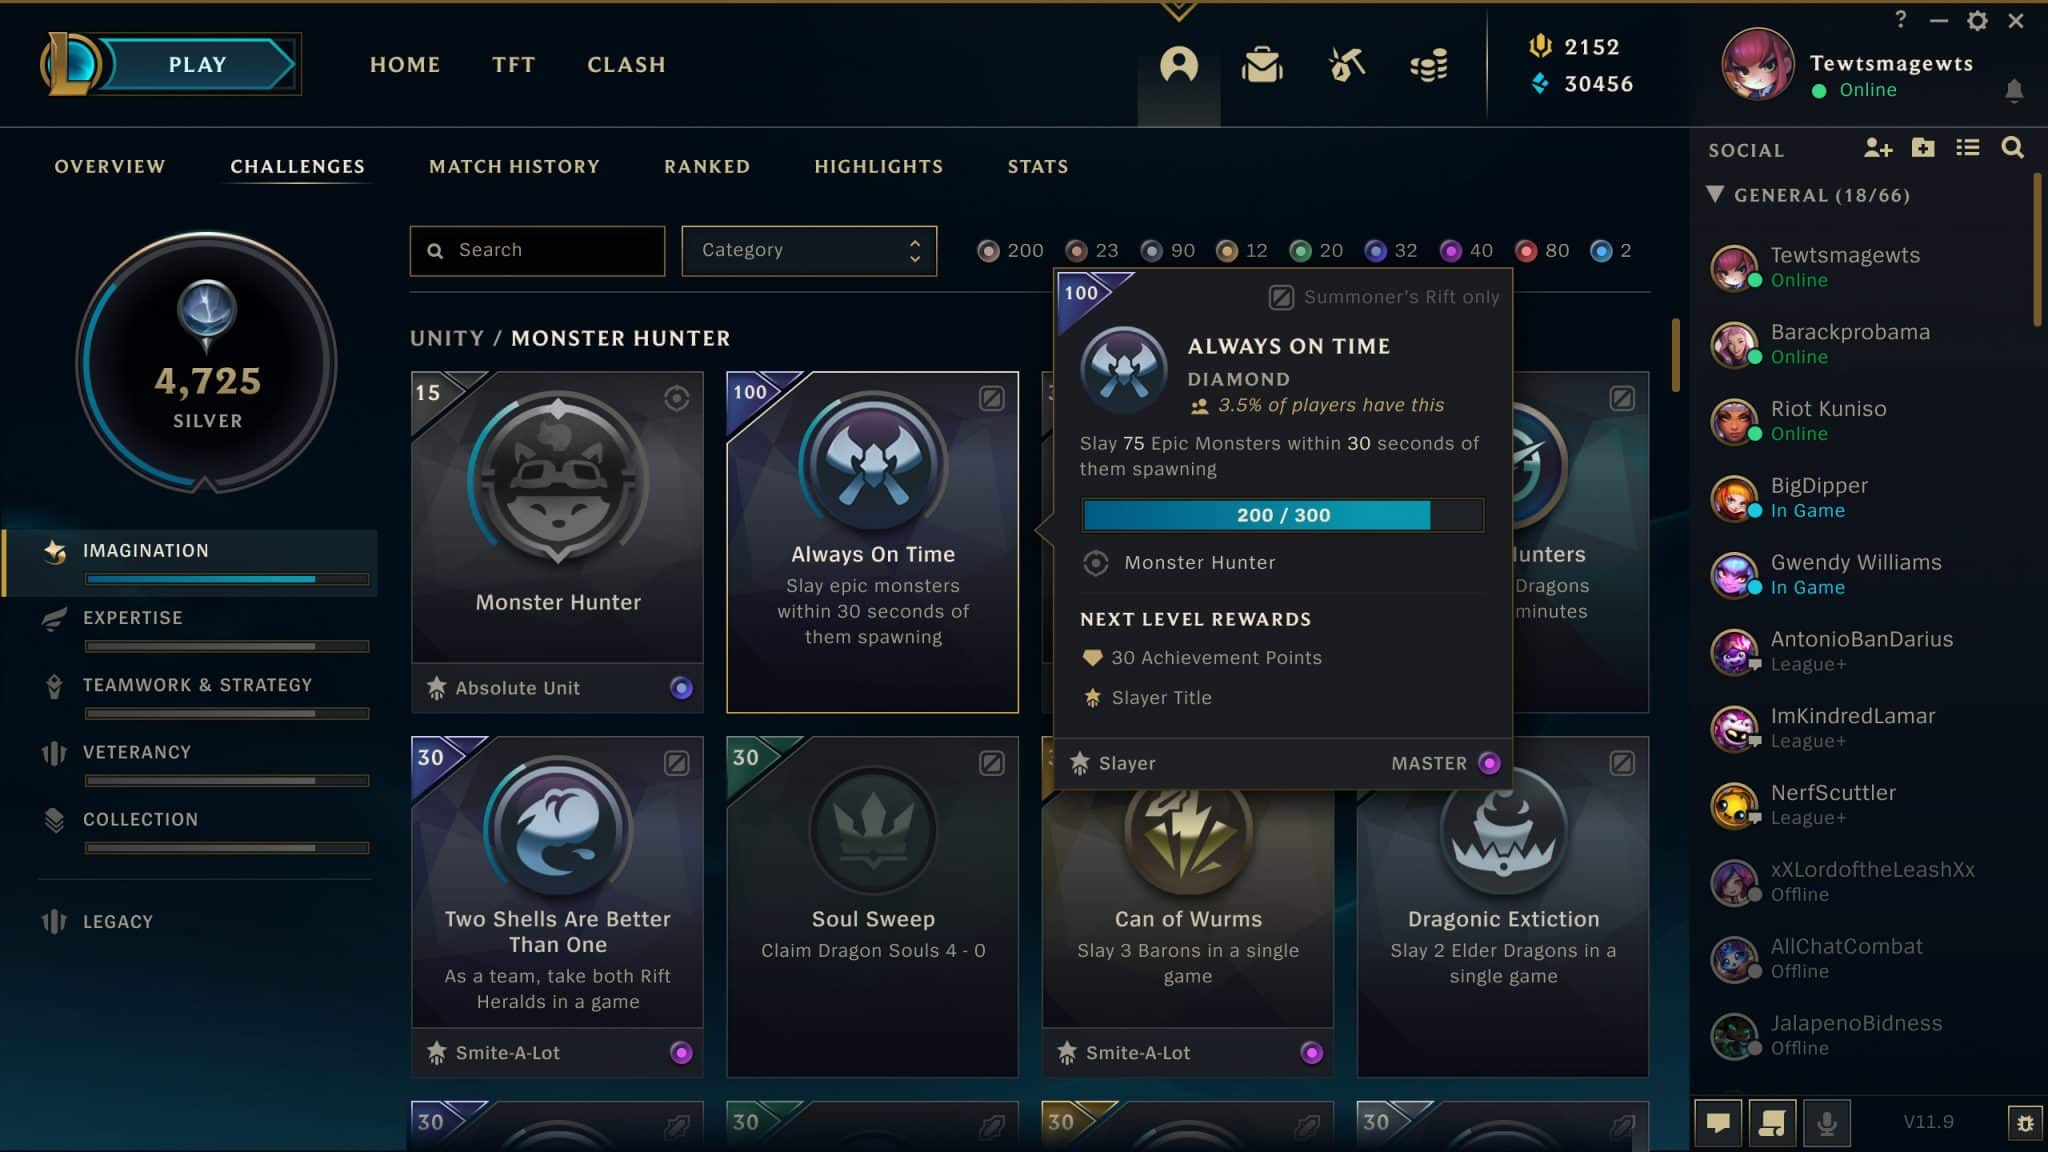 Challenges collection in League of Legends